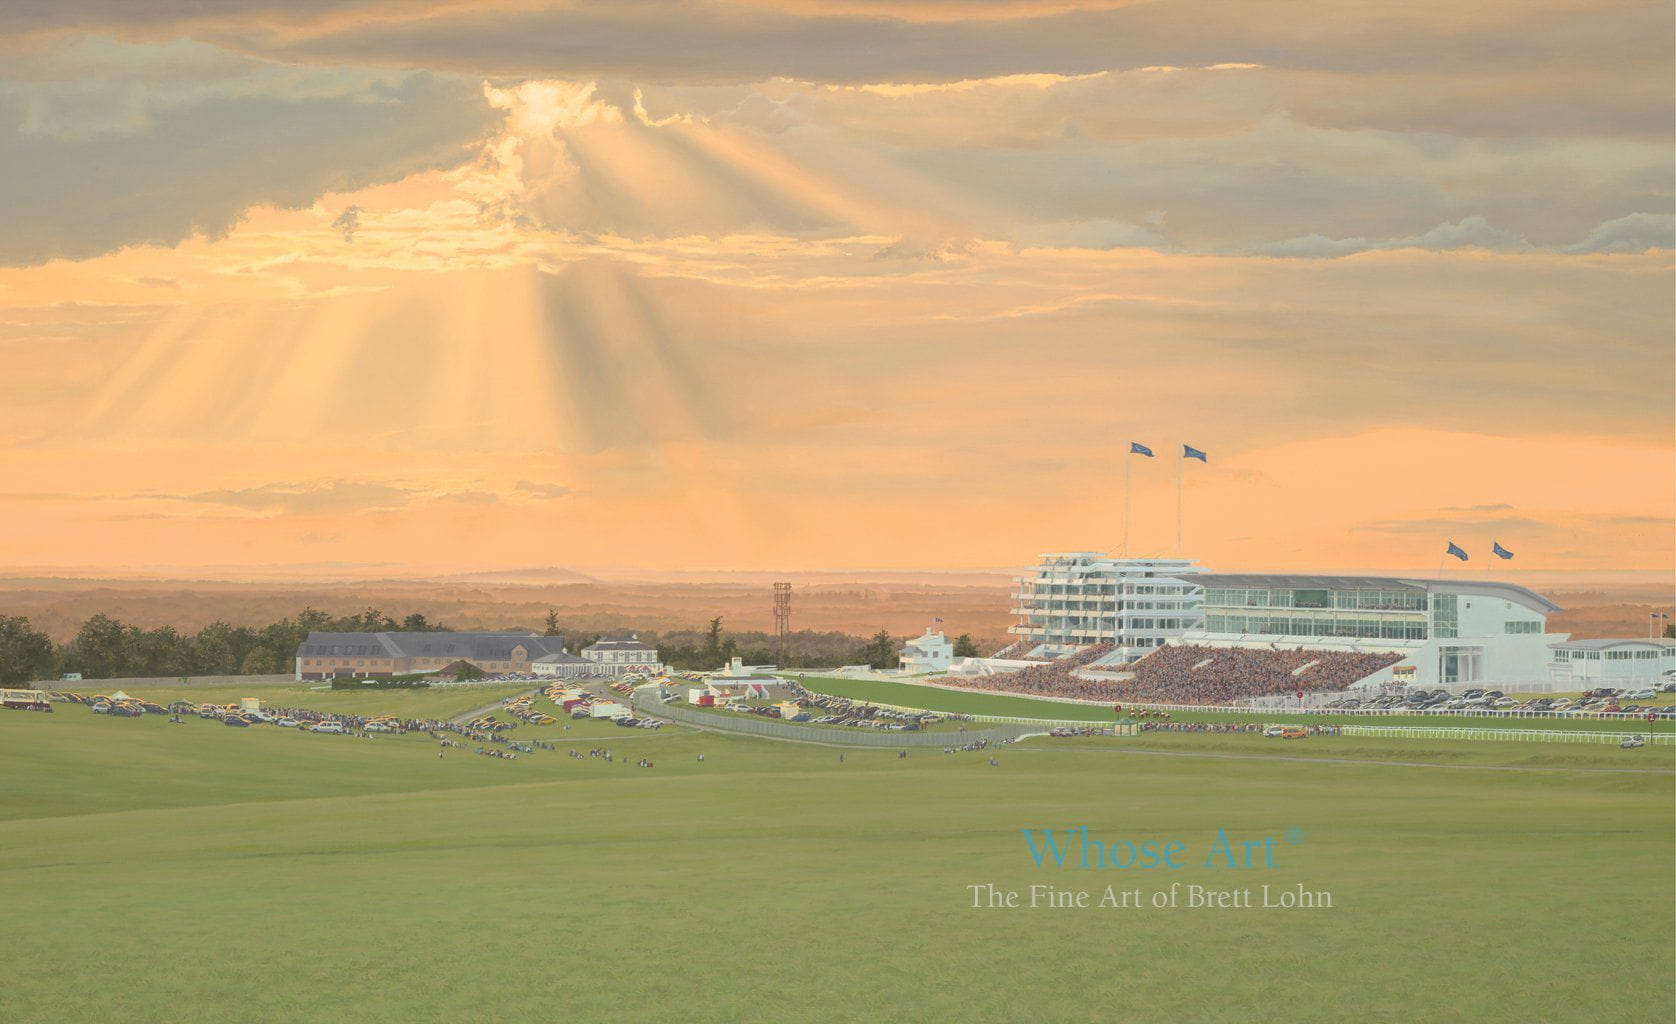 Horse racing Art picture of Epsom Downs during an evening race meeting with the sun setting in a dramatic stormy sky. 